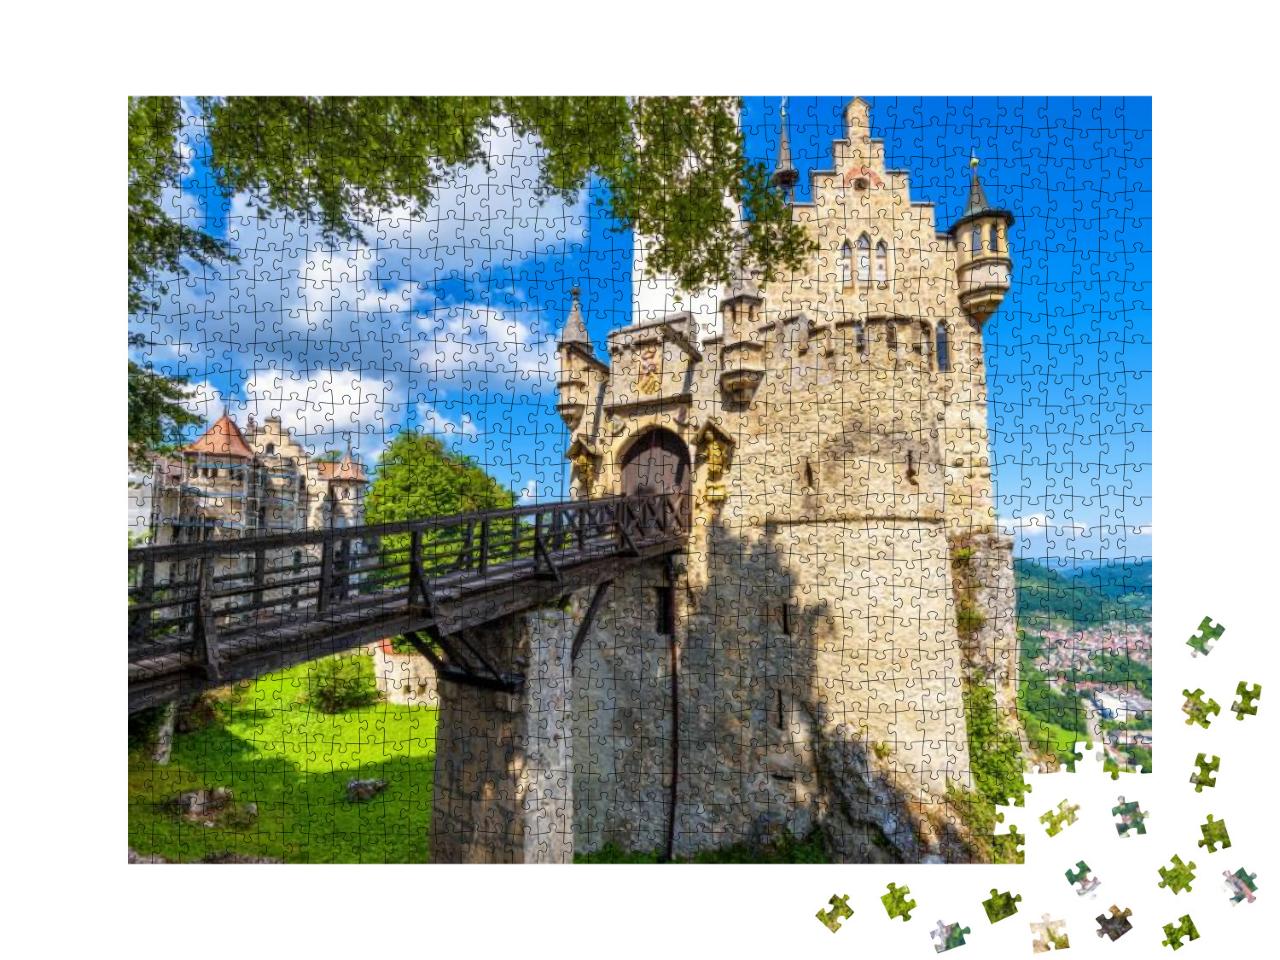 Lichtenstein Castle with Wooden Bridge, Germany. This Fai... Jigsaw Puzzle with 1000 pieces